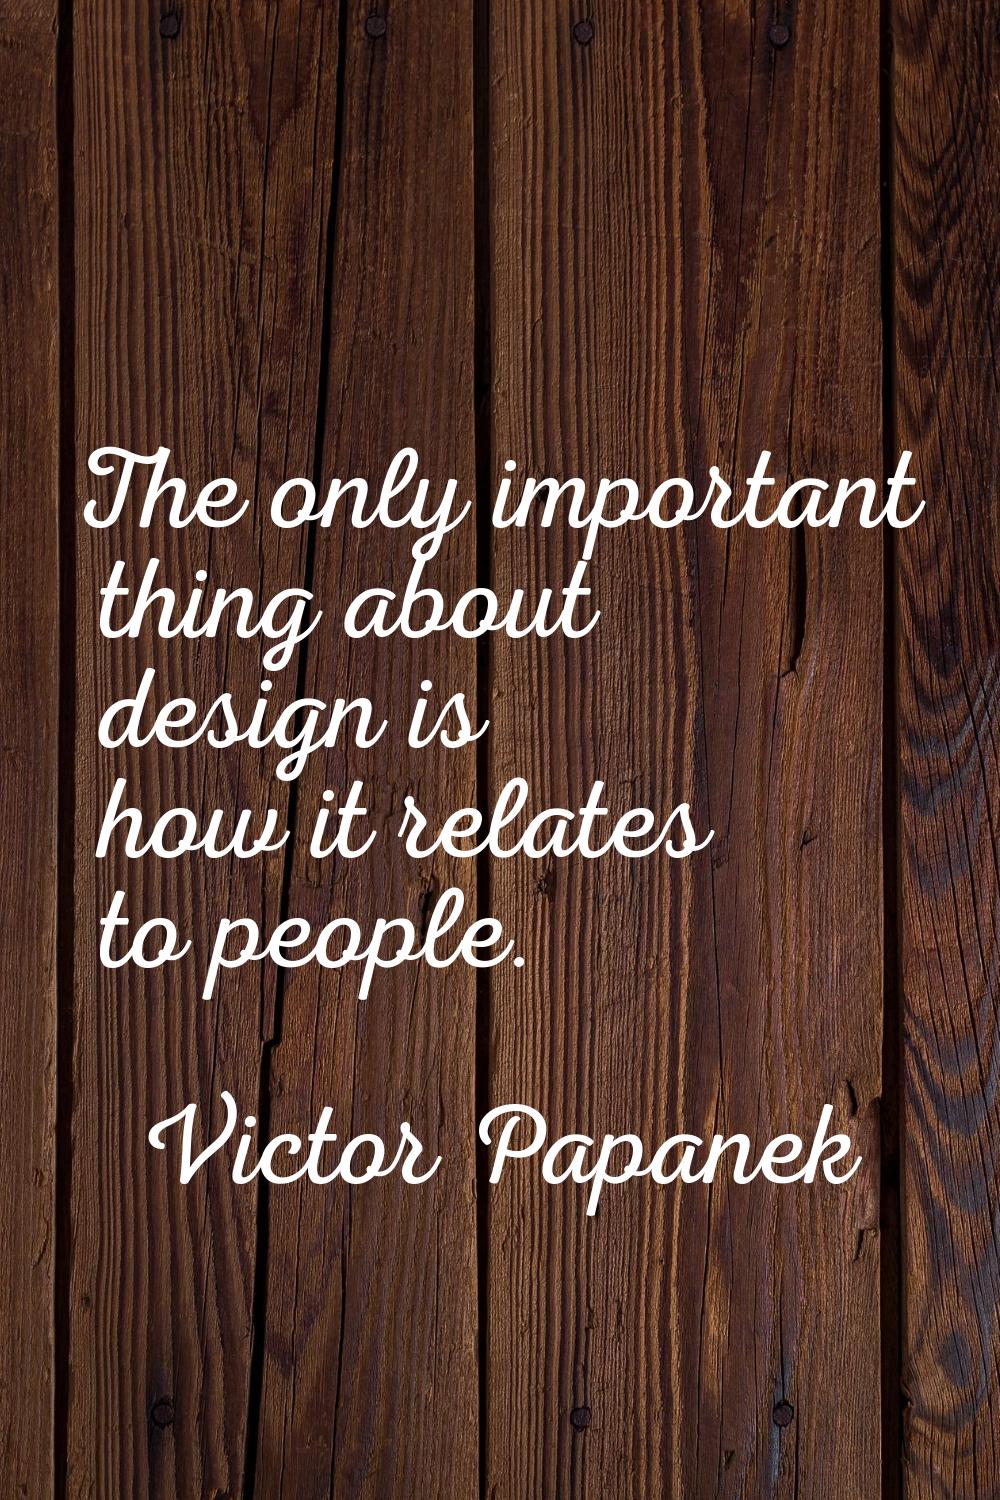 The only important thing about design is how it relates to people.